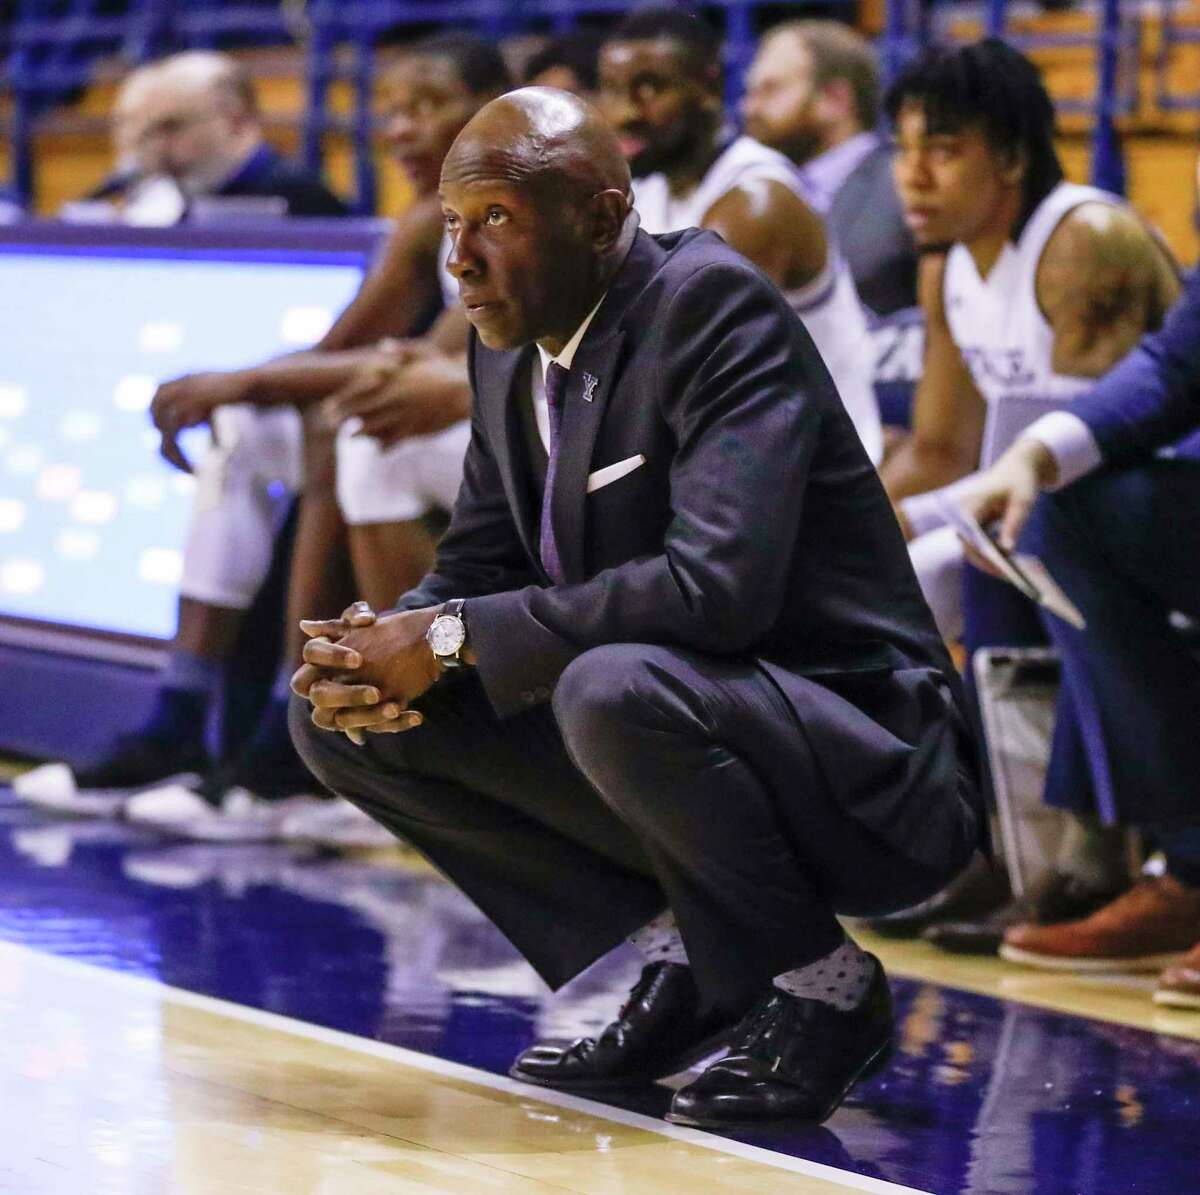 Yale coach James Jones says “It’s extremely frustrating that we can’t get anybody in the state of Connecticut to play us on a regular basis.”